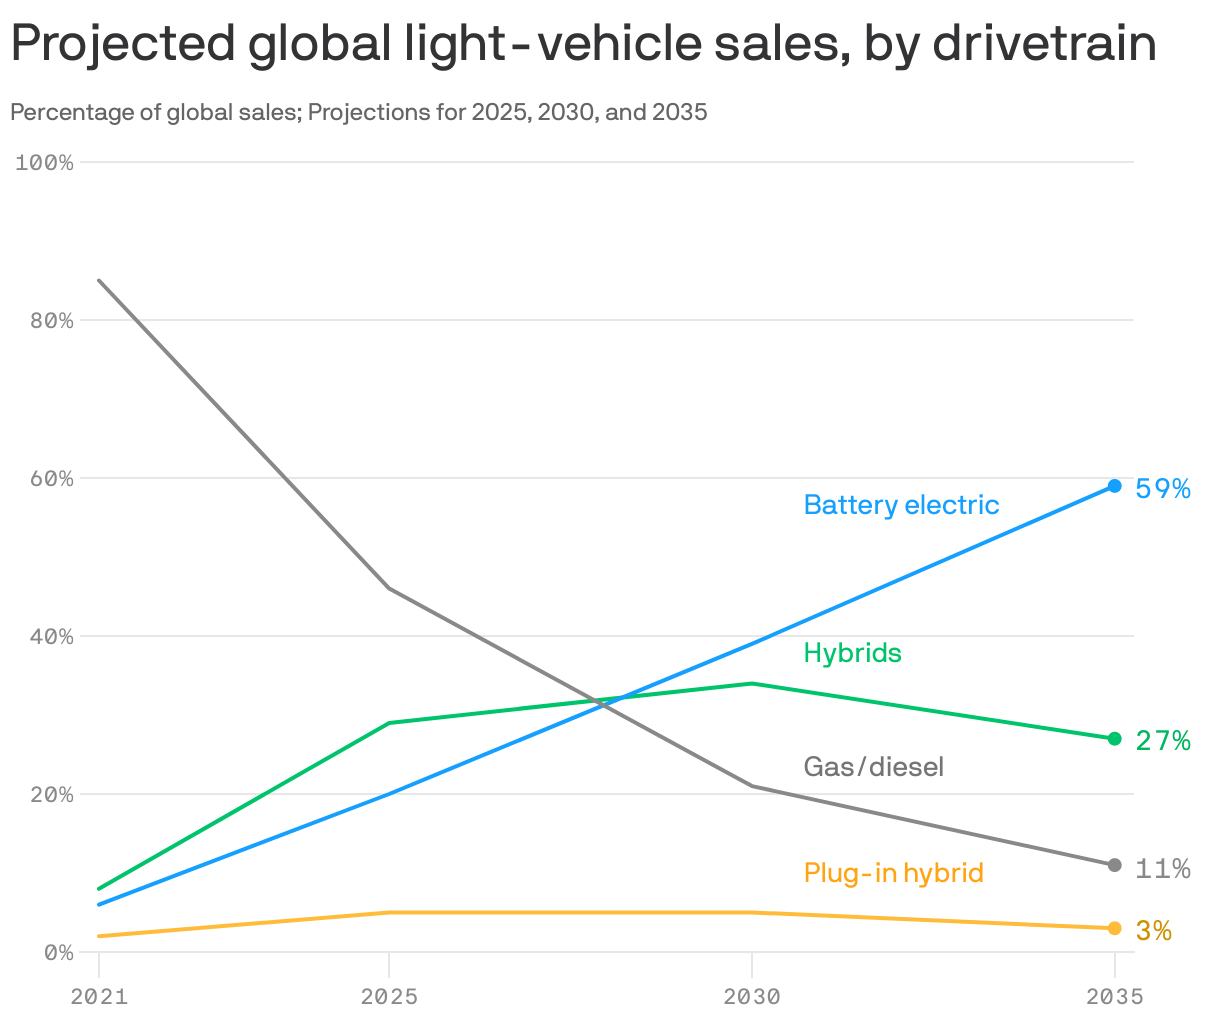 Projected global light-vehicle sales, by drivetrain